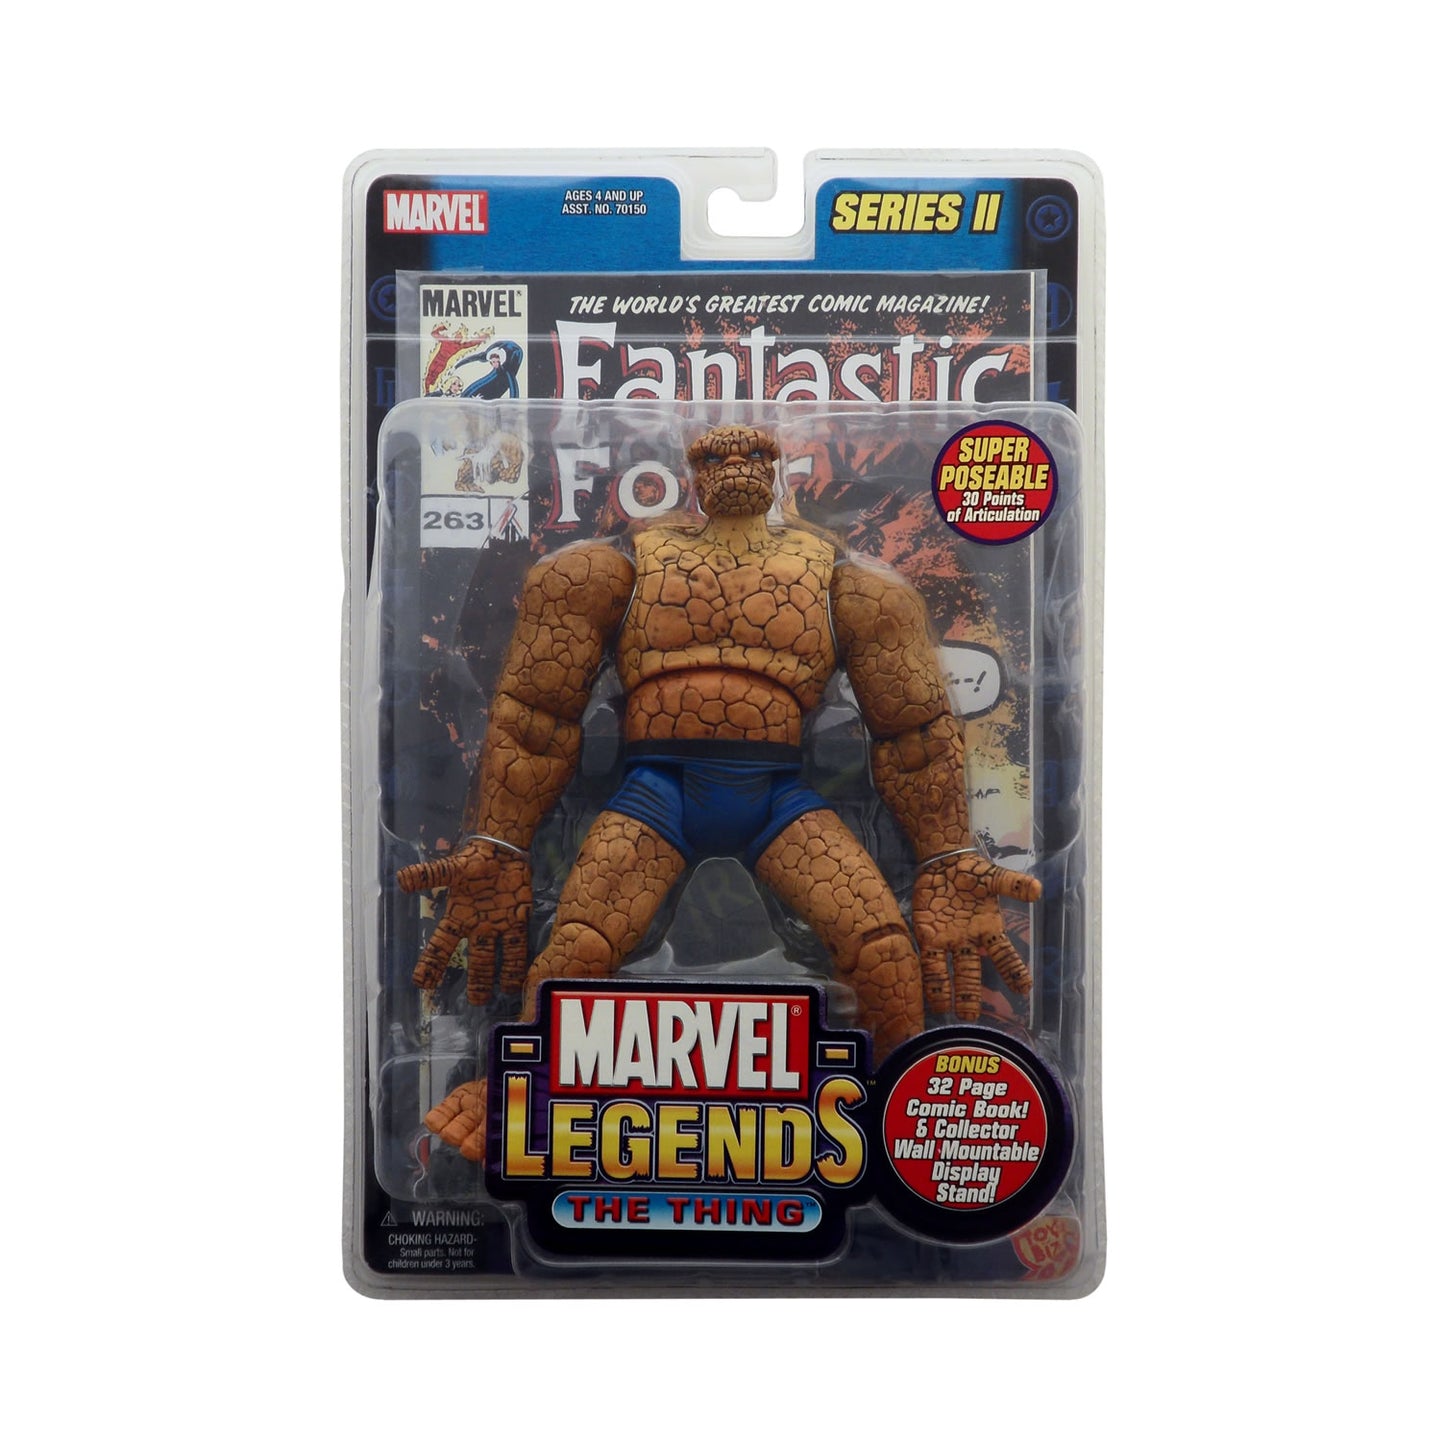 Marvel Legends Series II The Thing